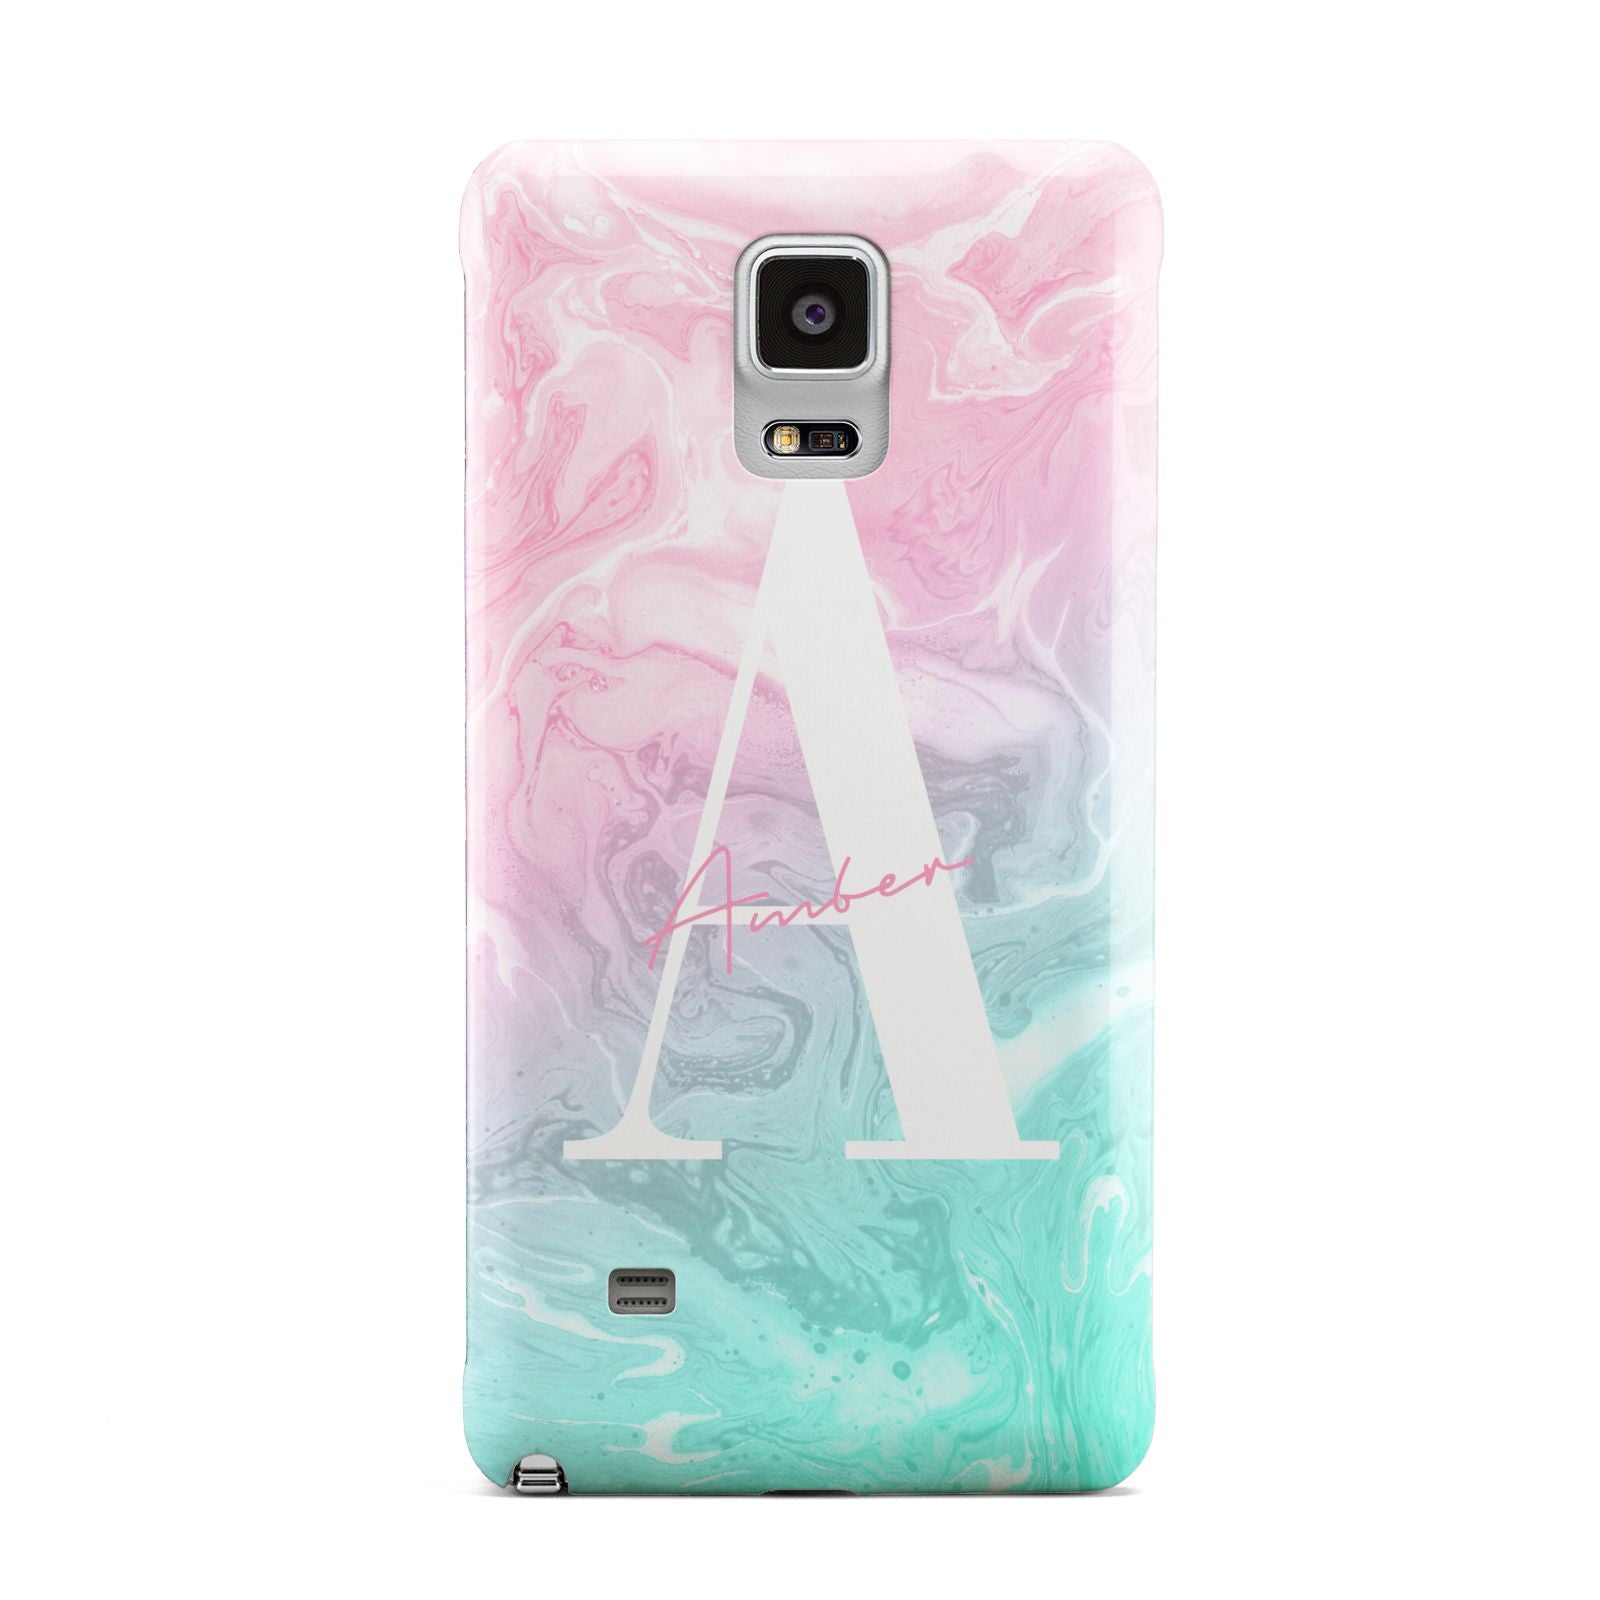 Monogrammed Pink Turquoise Pastel Marble Samsung Galaxy Note 4 Case